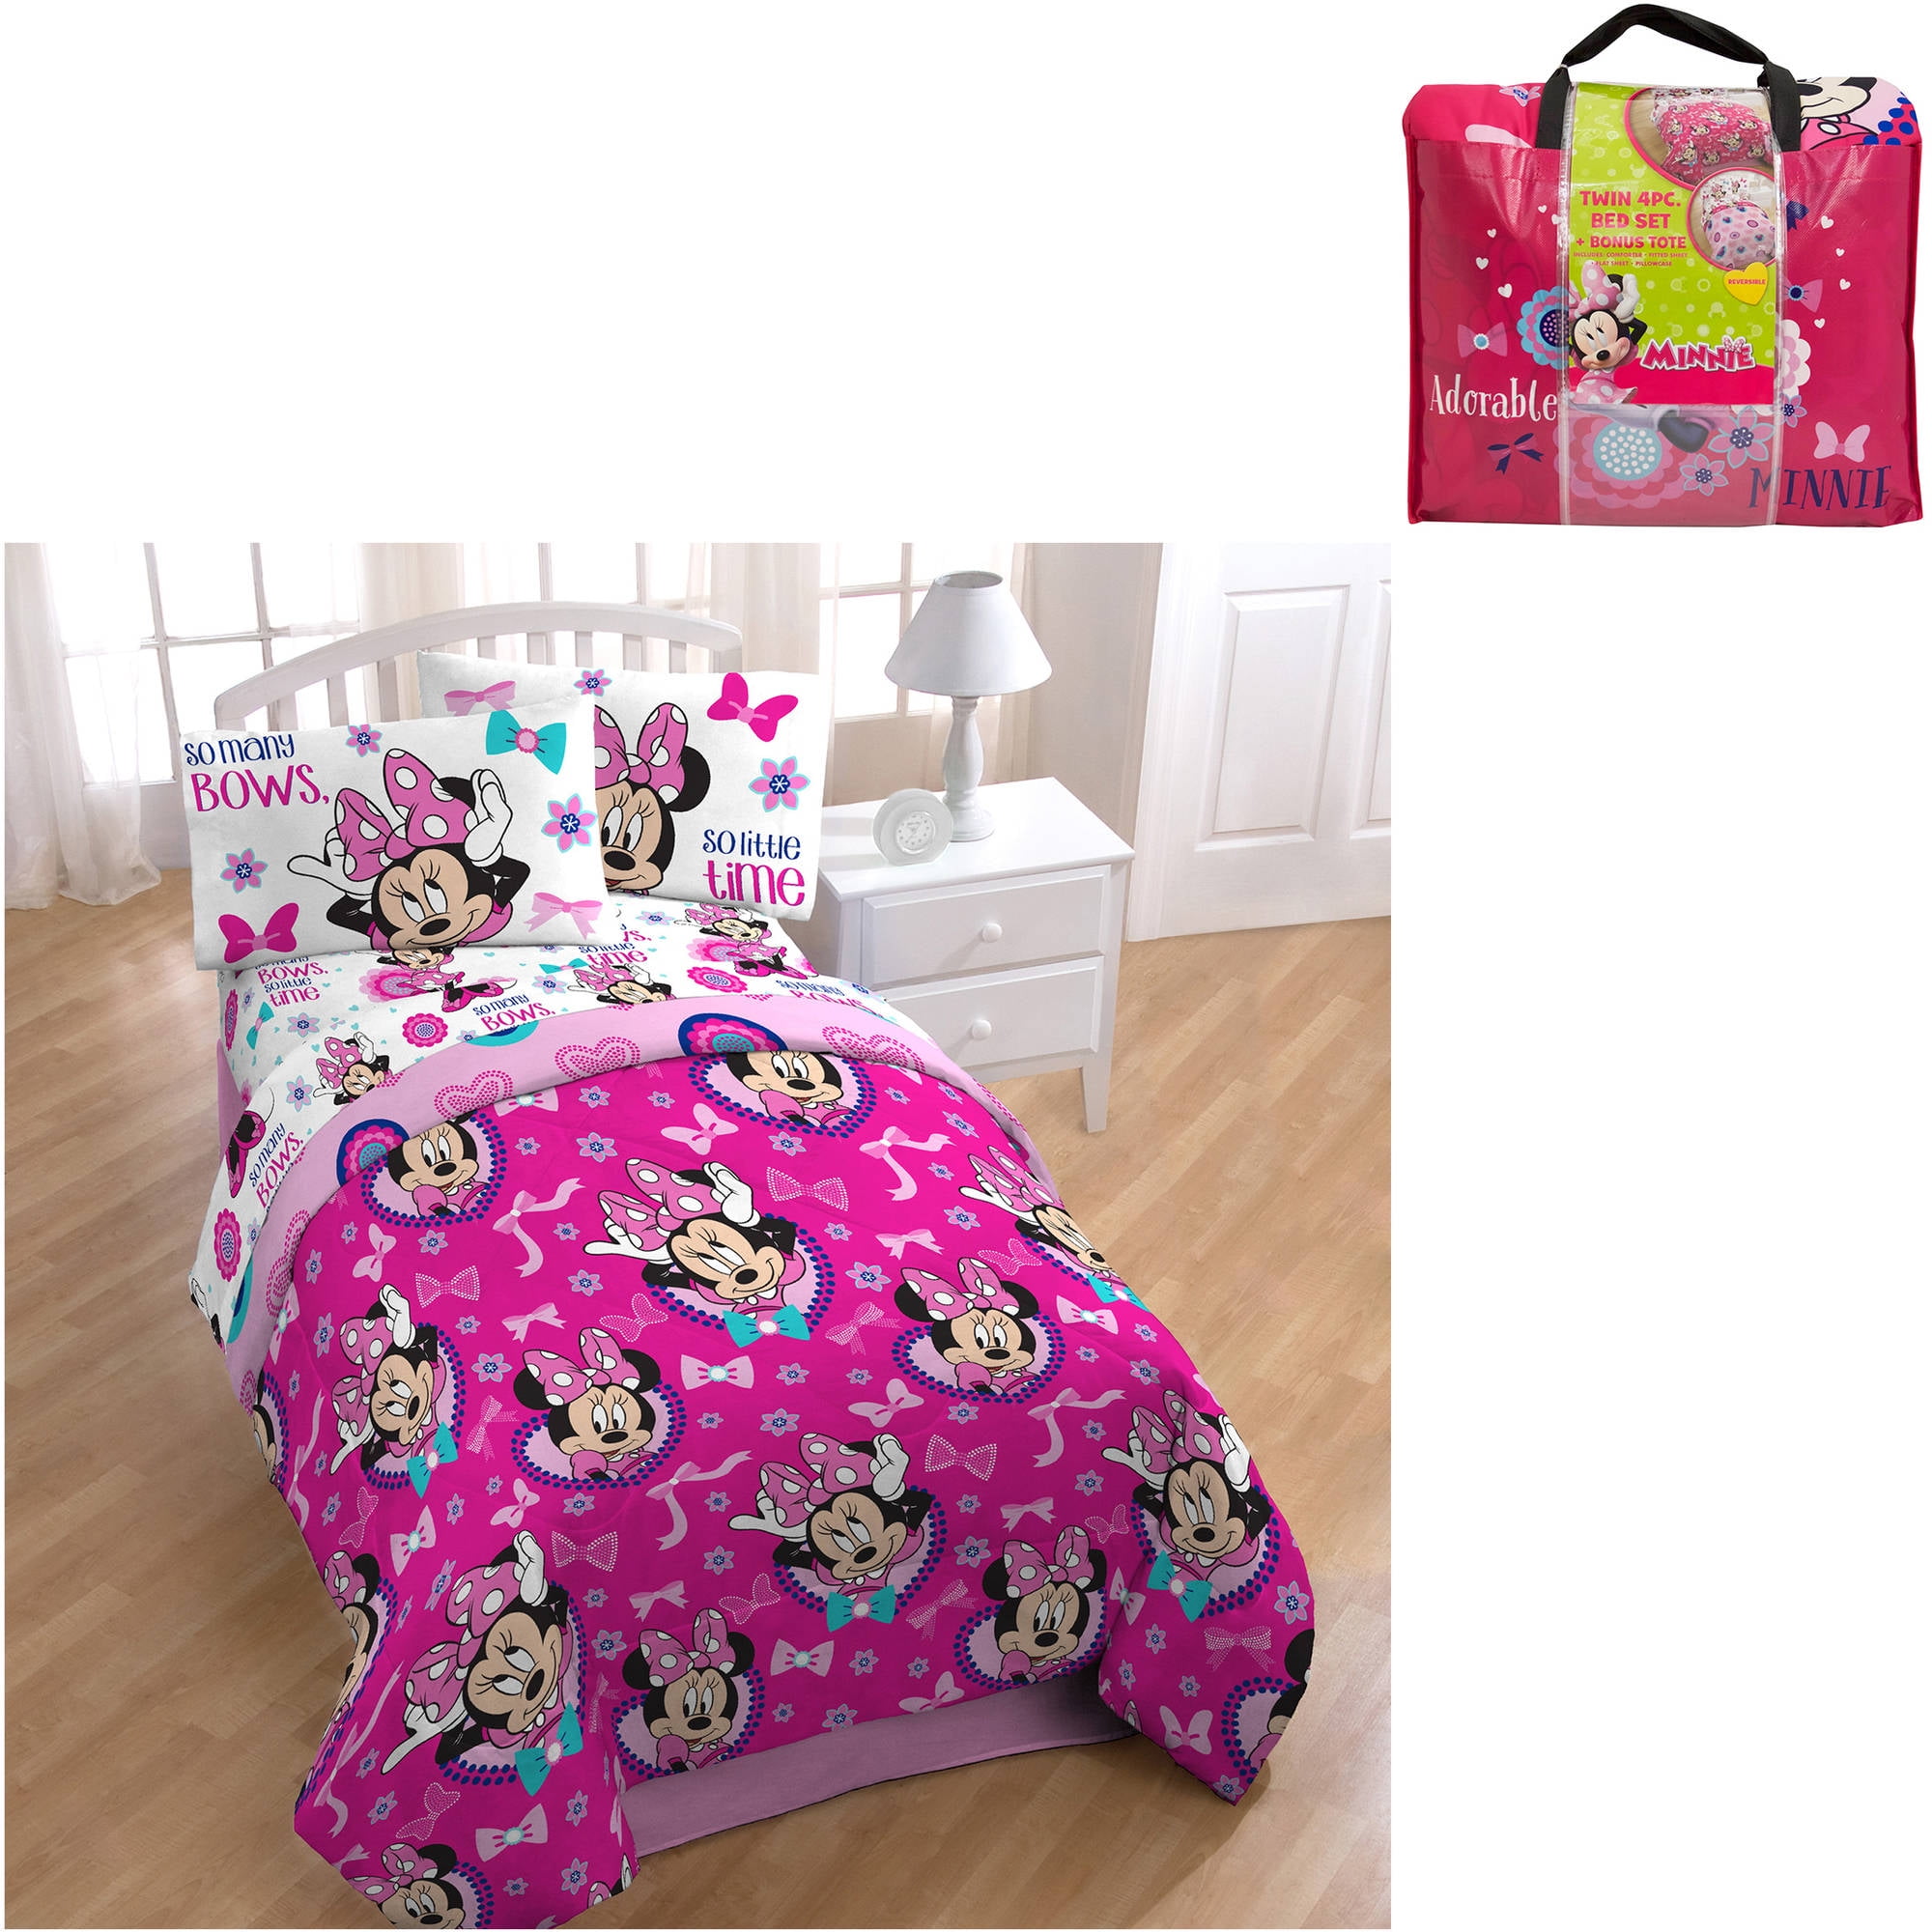 Disney's Minnie Mouse Polka Dots Twin Comforter & Sheets K 4 Piece Bed In A Bag 